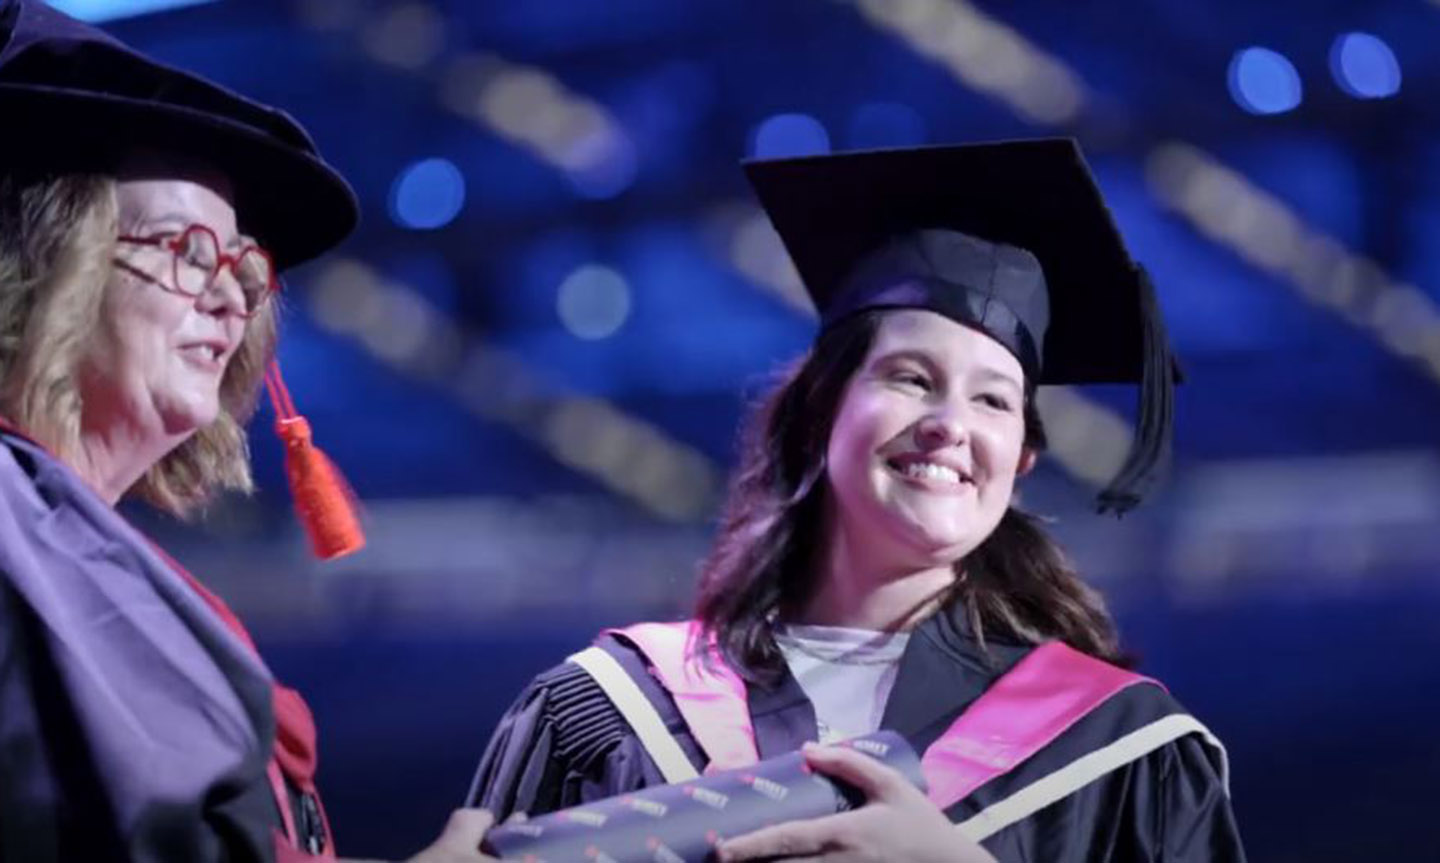 A female graduate in academic dress smiles as she receives her graduation scroll from a female academic on stage at the ceremony.